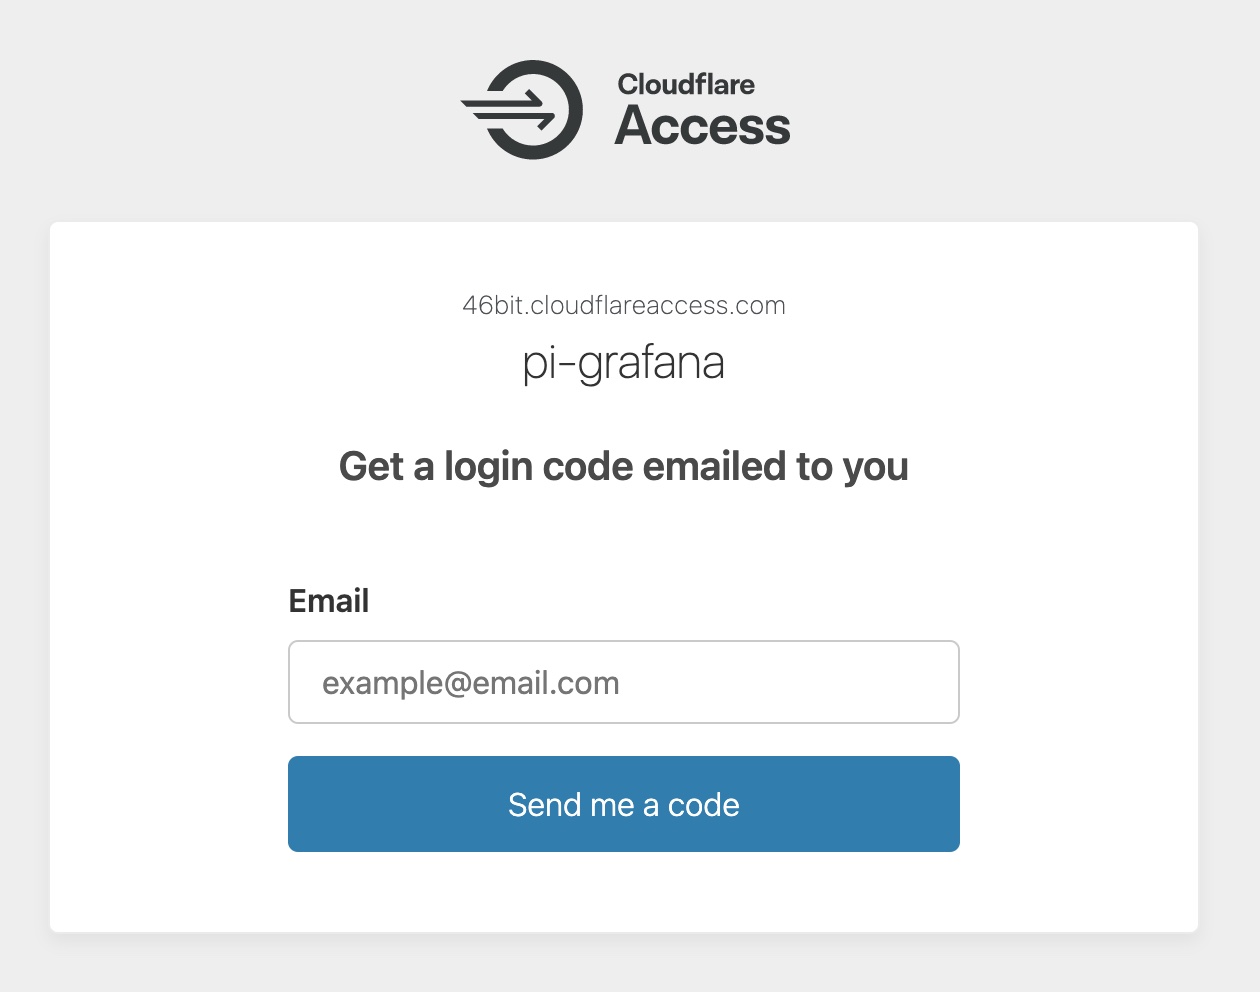 The login page that Cloudflare Teams provides